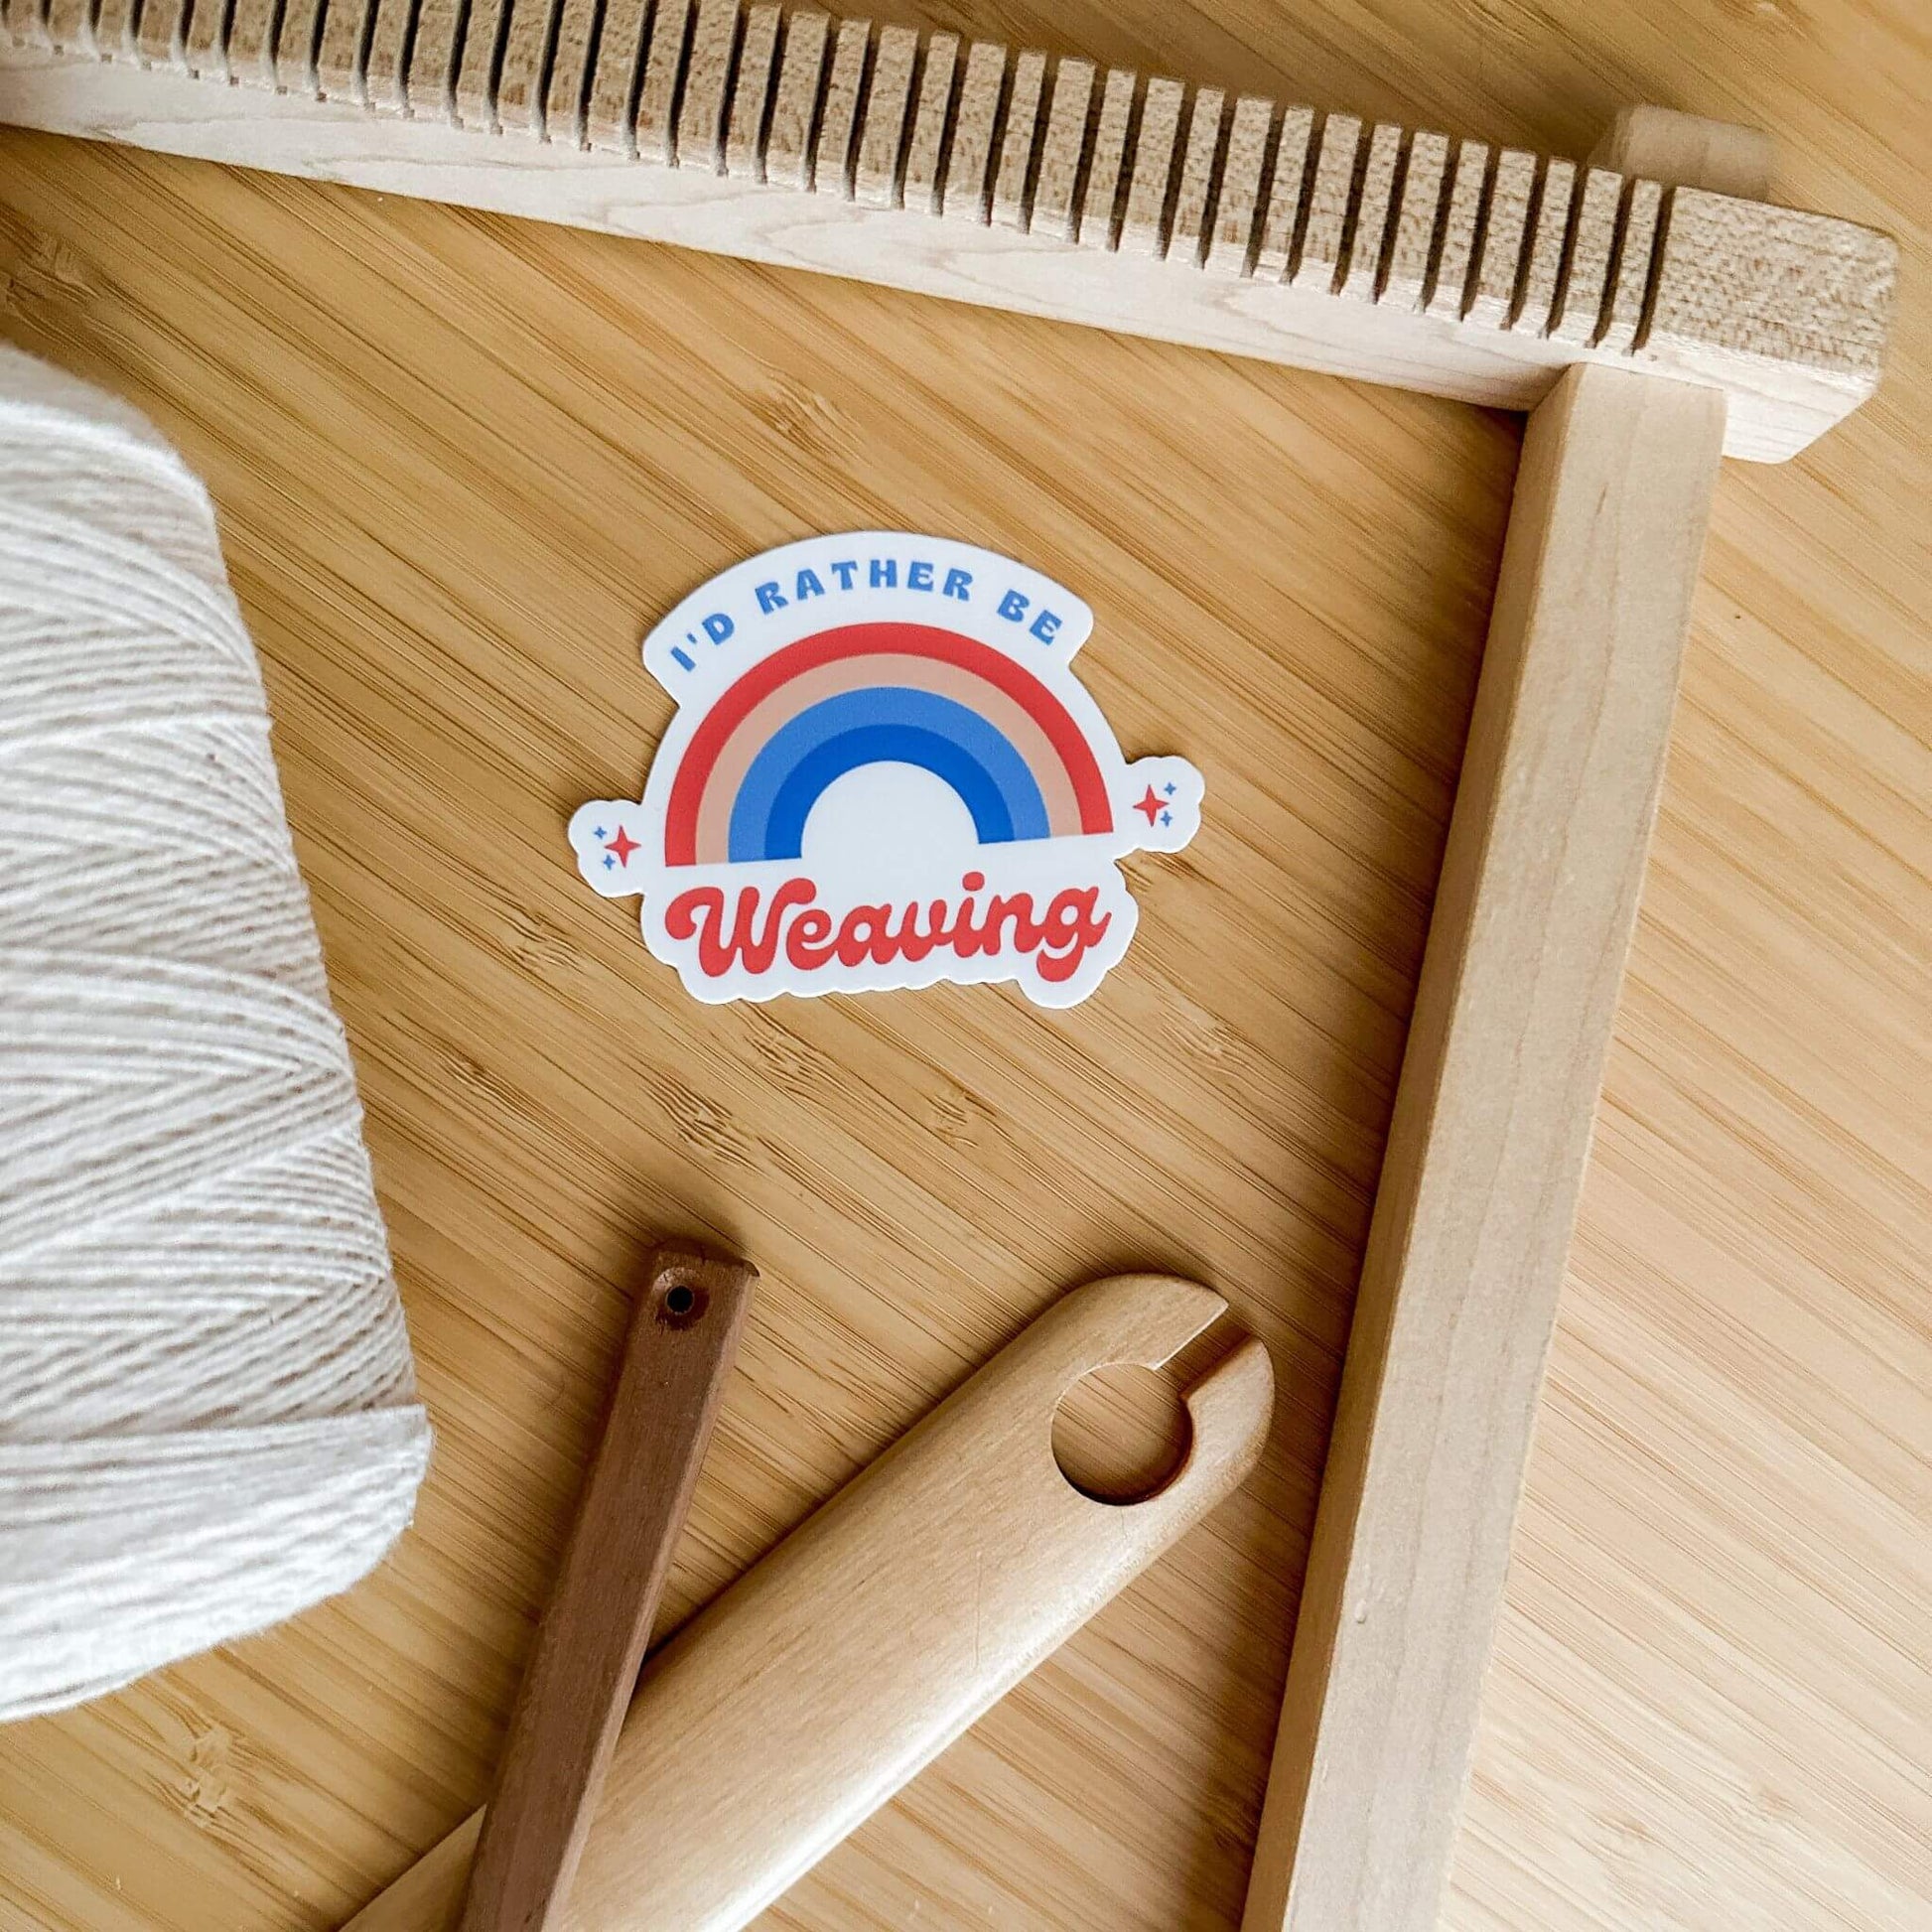 i'd rather be weaving sticker - wear and woven